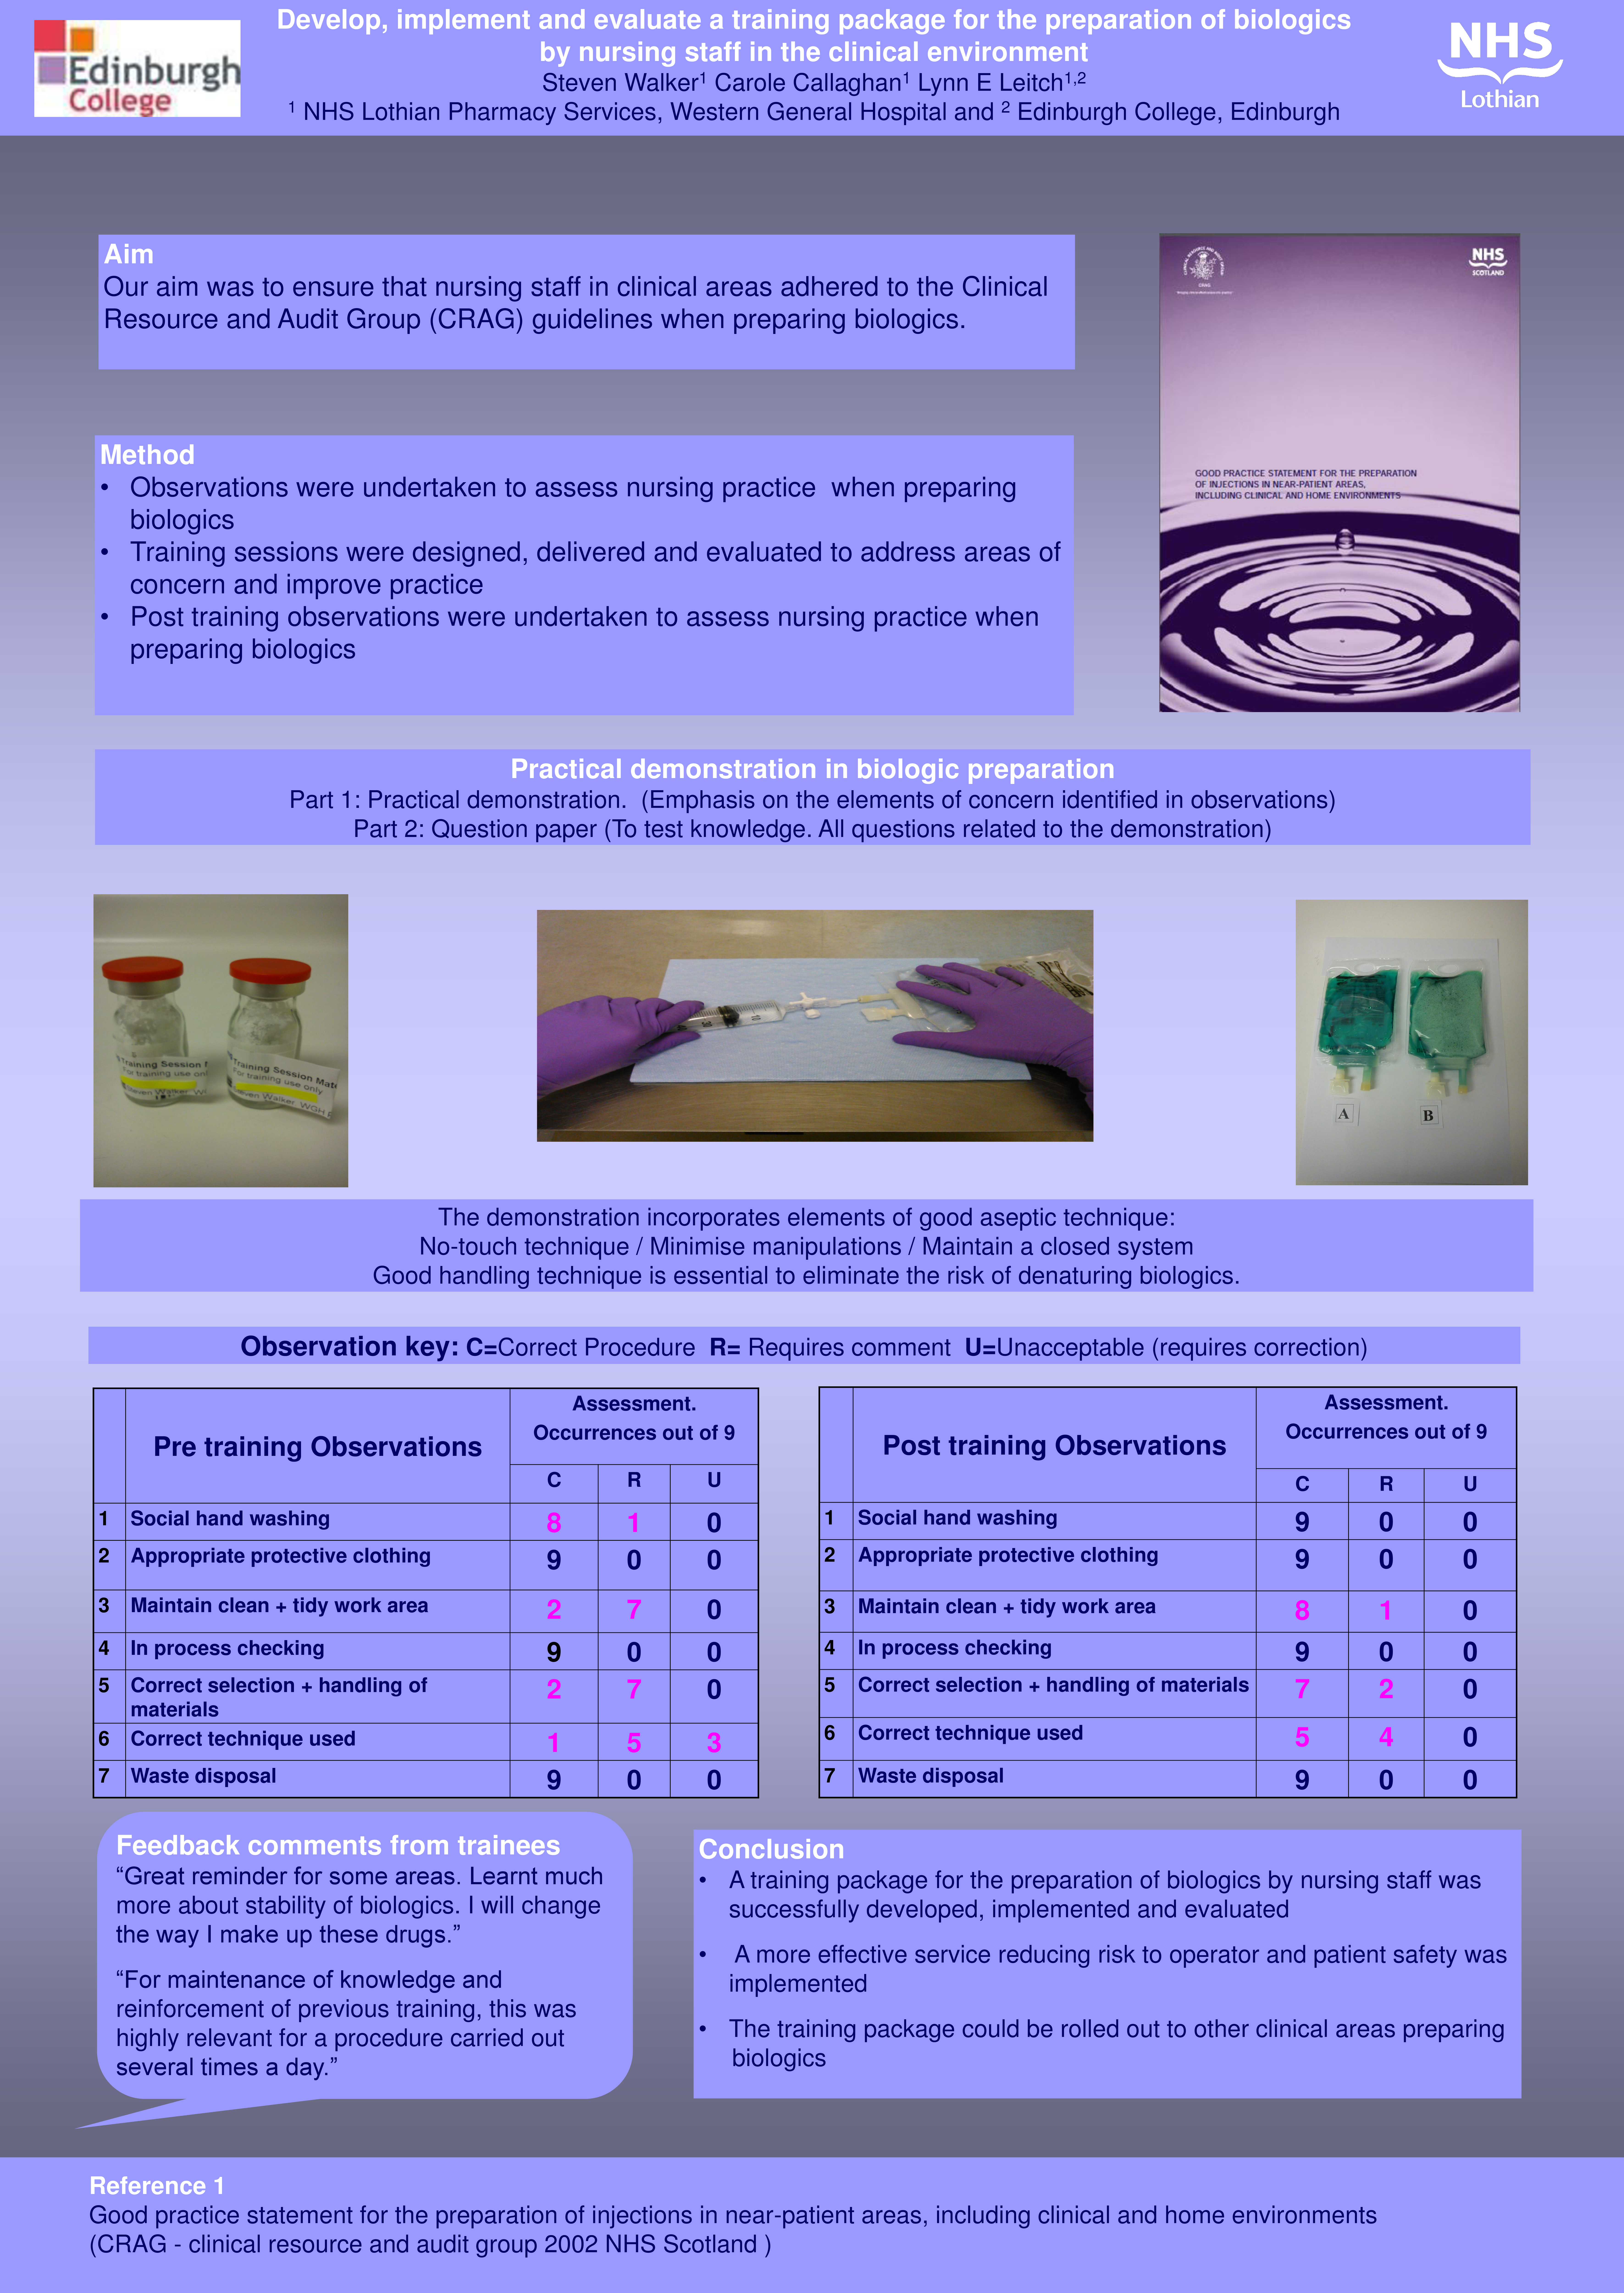 NHSScotland 2014 Poster Abstract final-page-0.png